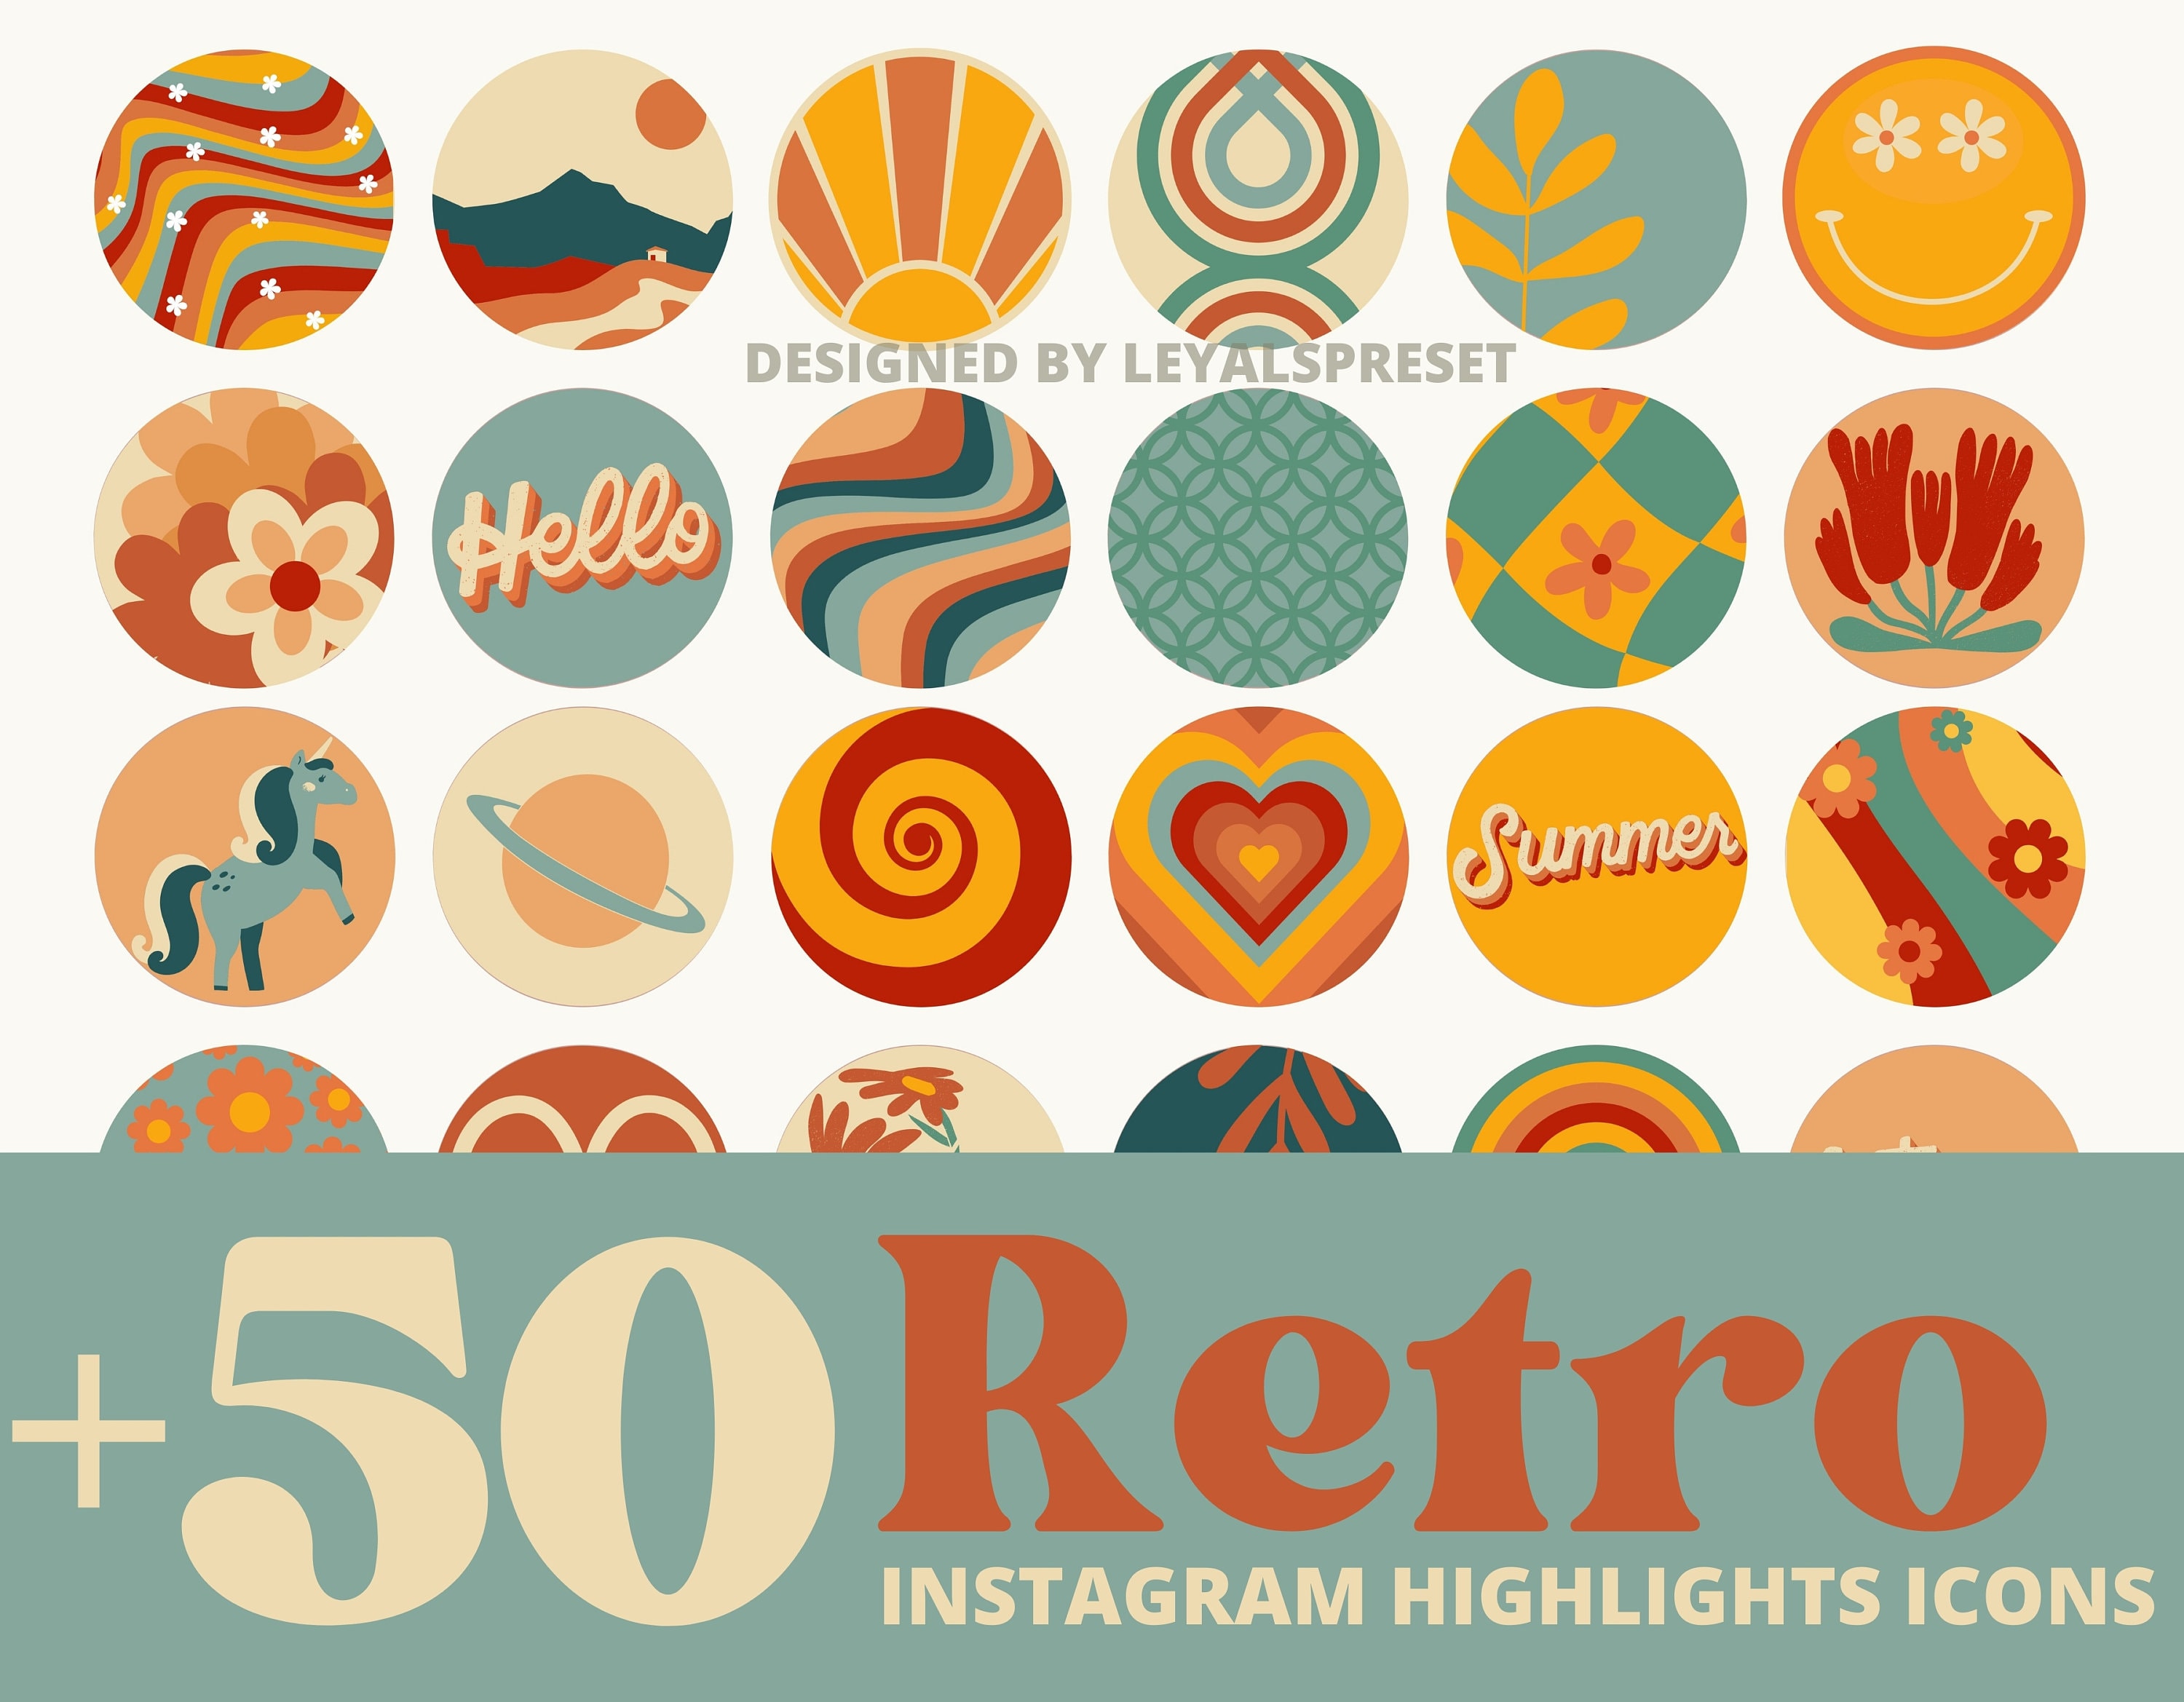 100 Instagram Highlight Cover Icons, Minimalist Instagram Stories, Instagram  Highlights, Beige Instagram Theme, Boho Instagram Highlights, 